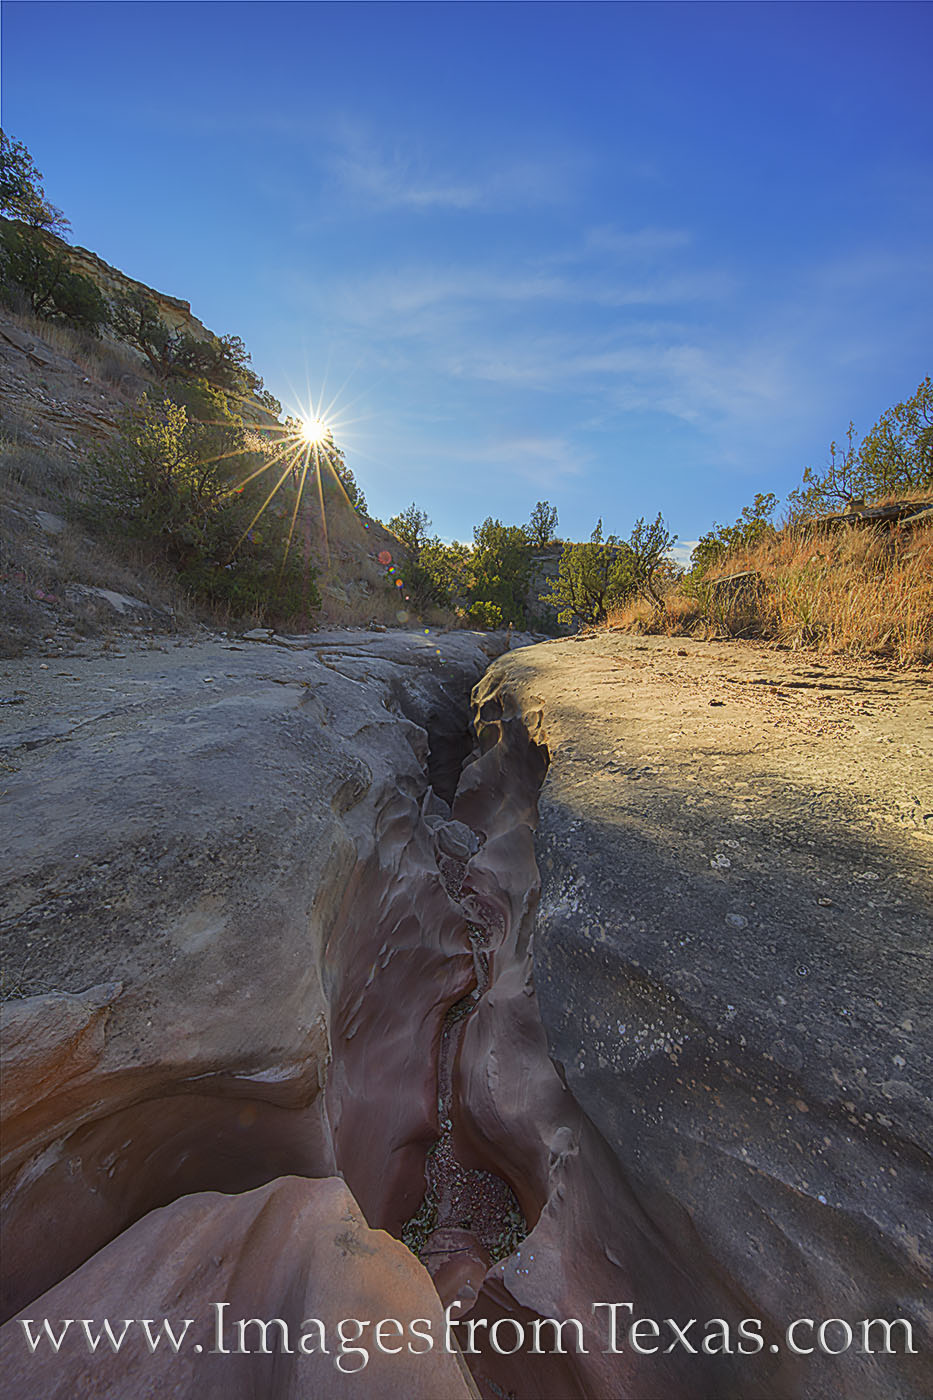 Sunlight begins to warm the November landscape in Palo Duro Canyon. This small crack in the ground is actually the entrance to...